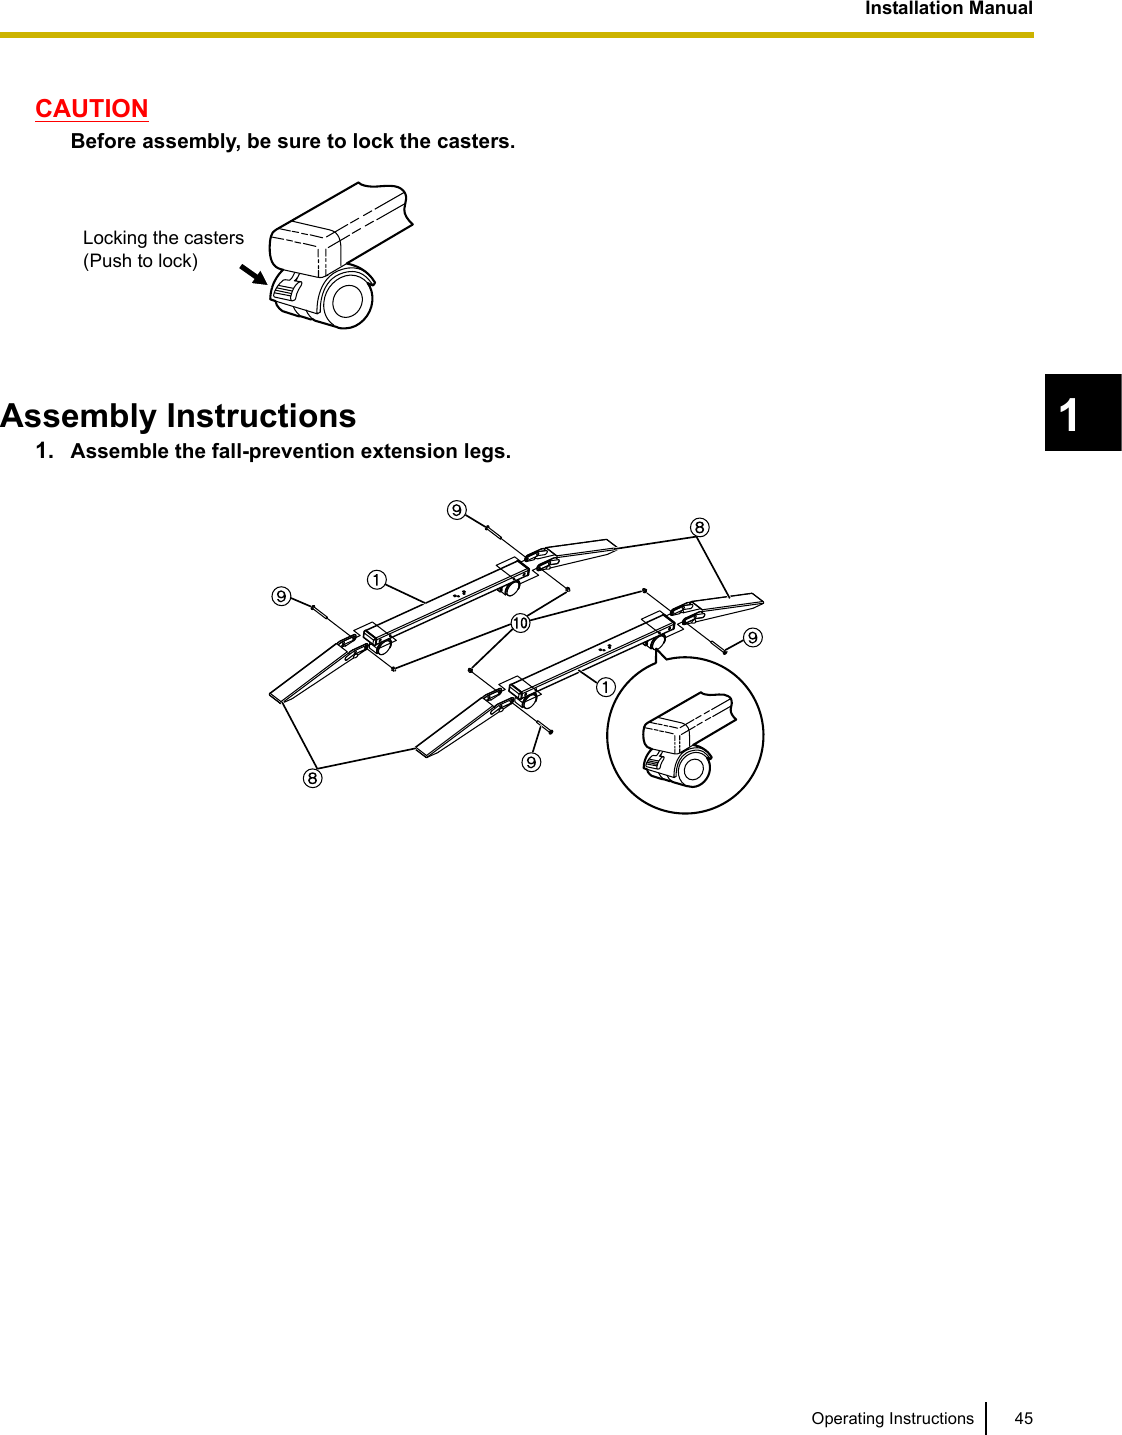 Installation Manual45Operating Instructions1CAUTIONBefore assembly, be sure to lock the casters.Assembly Instructions1. Assemble the fall-prevention extension legs.Locking the casters(Push to lock)